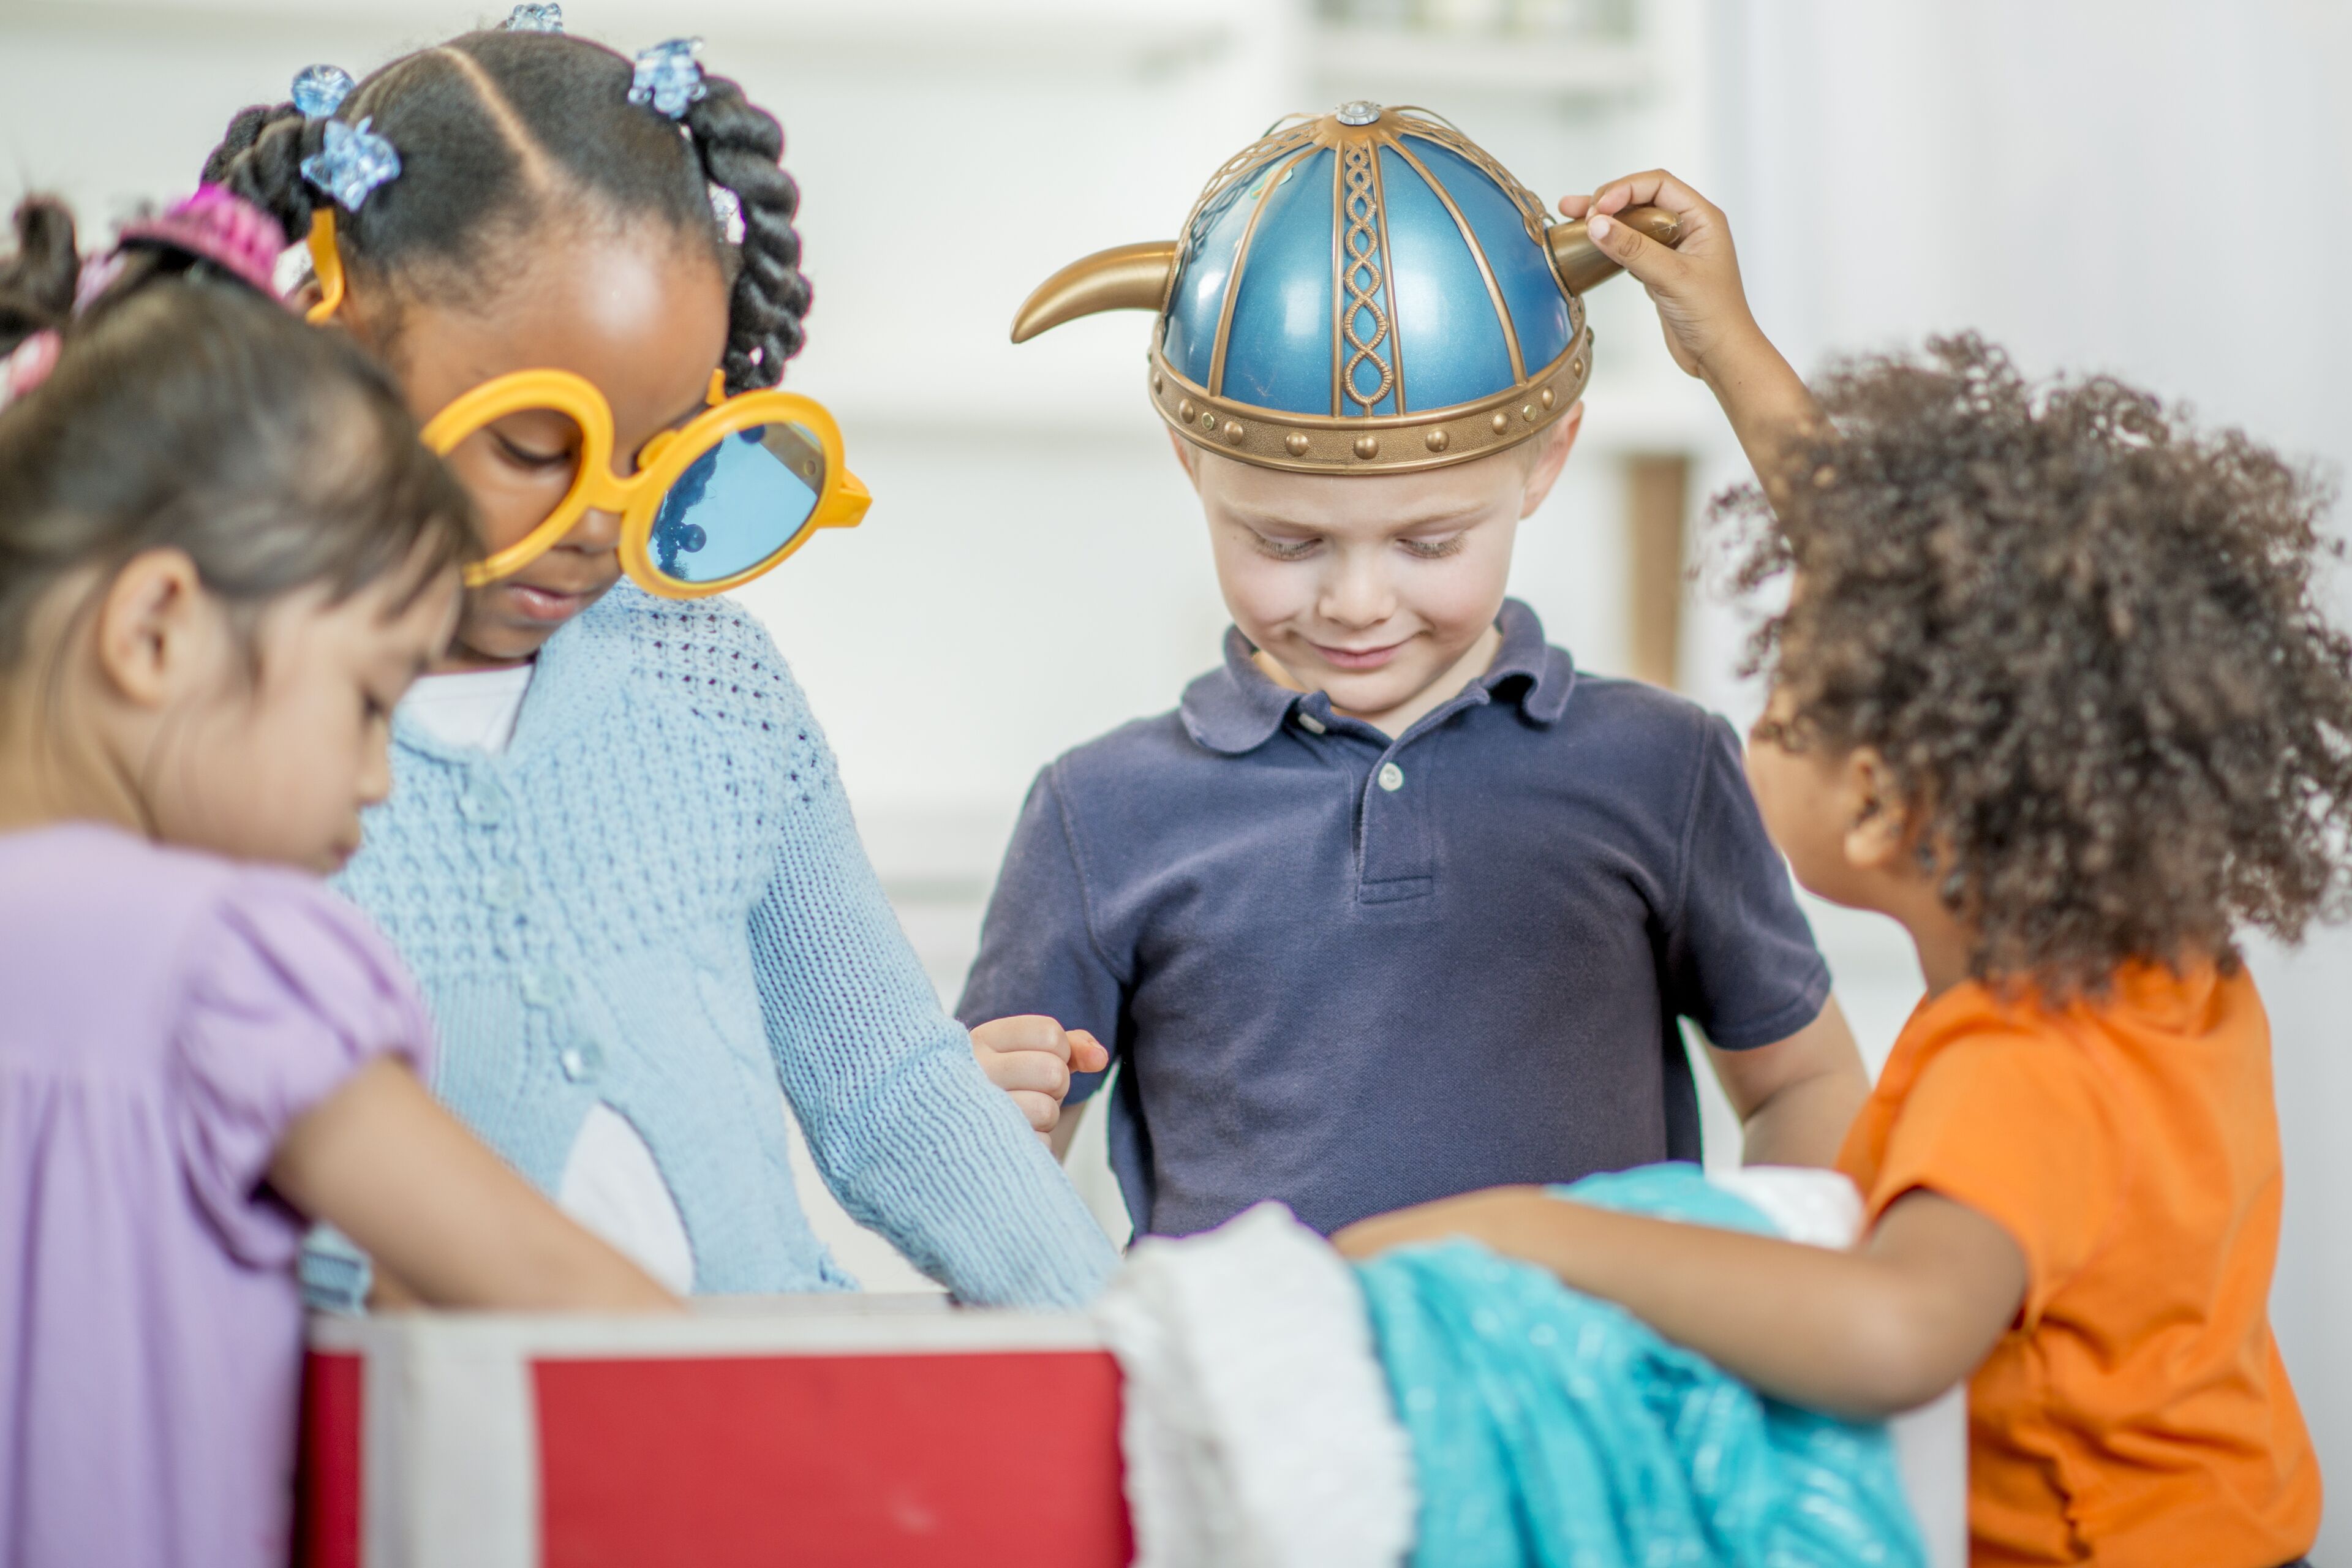 A group of four children are engaged in a playful dress-up activity, with one boy smiling while a girl places a Viking helmet on his head.